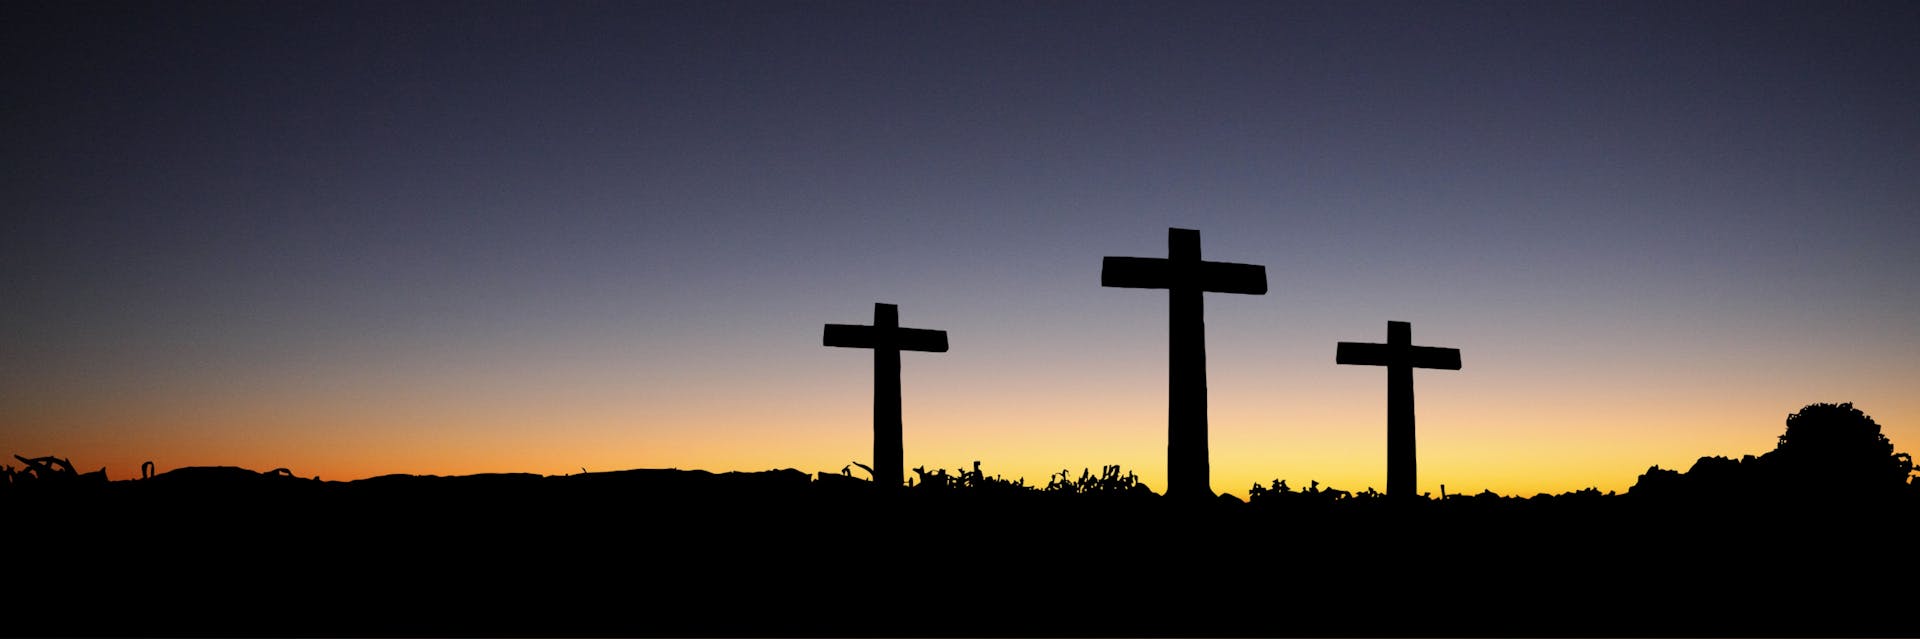 Three Christian crosses on a silhouette landscape with sunset.